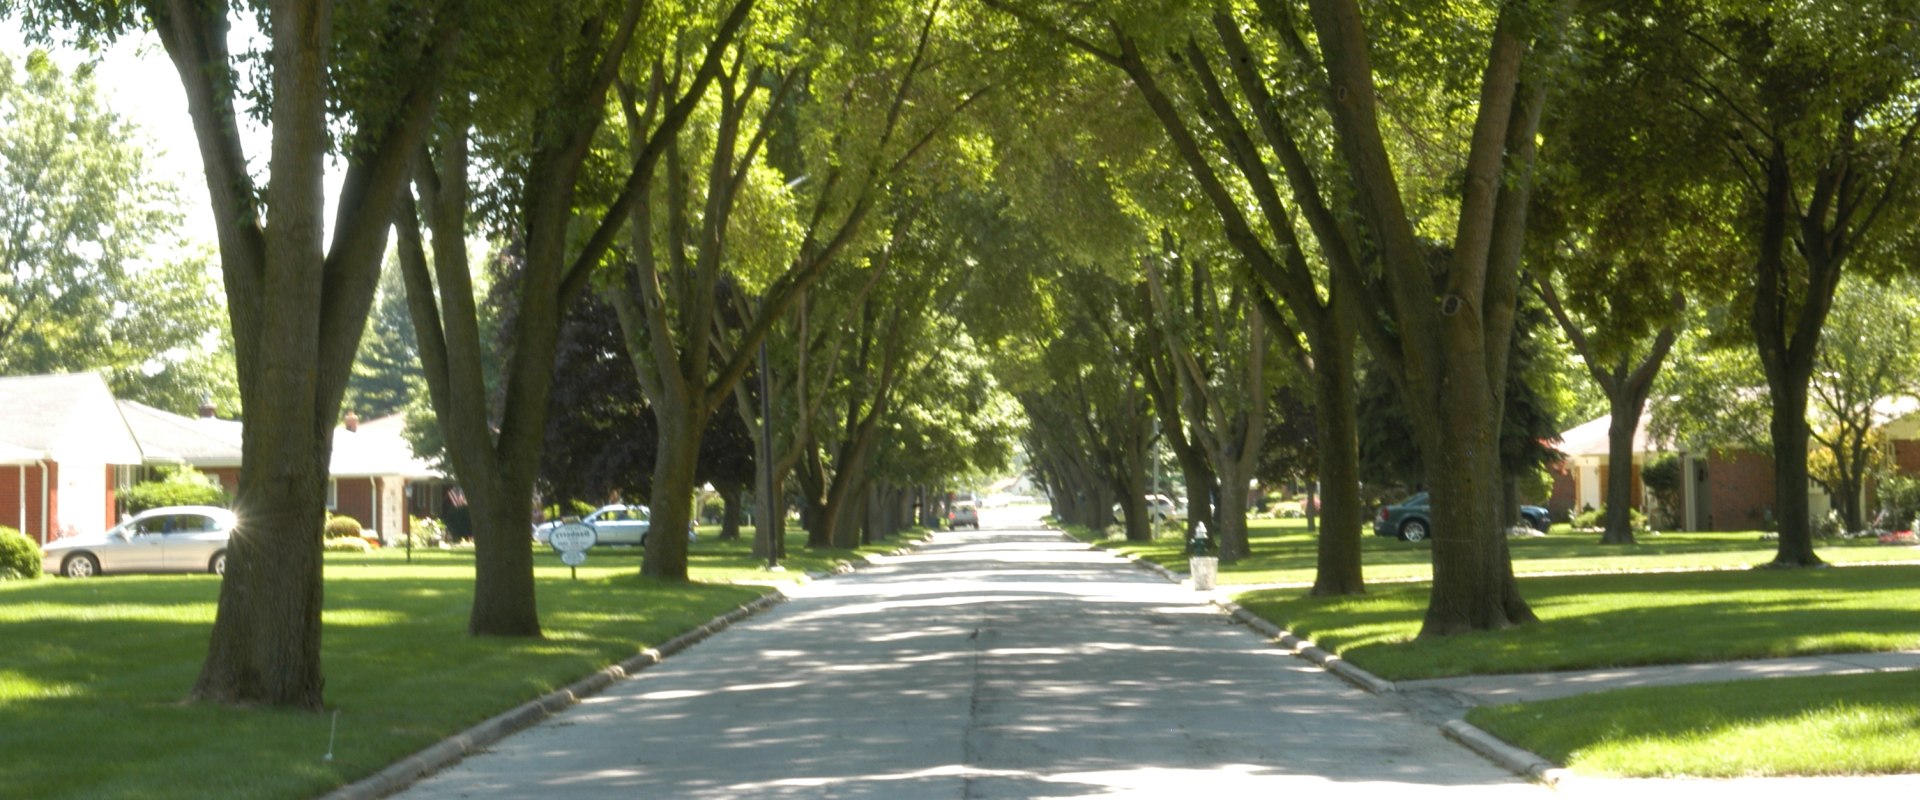 What are 2 benefits to having trees in urban areas?